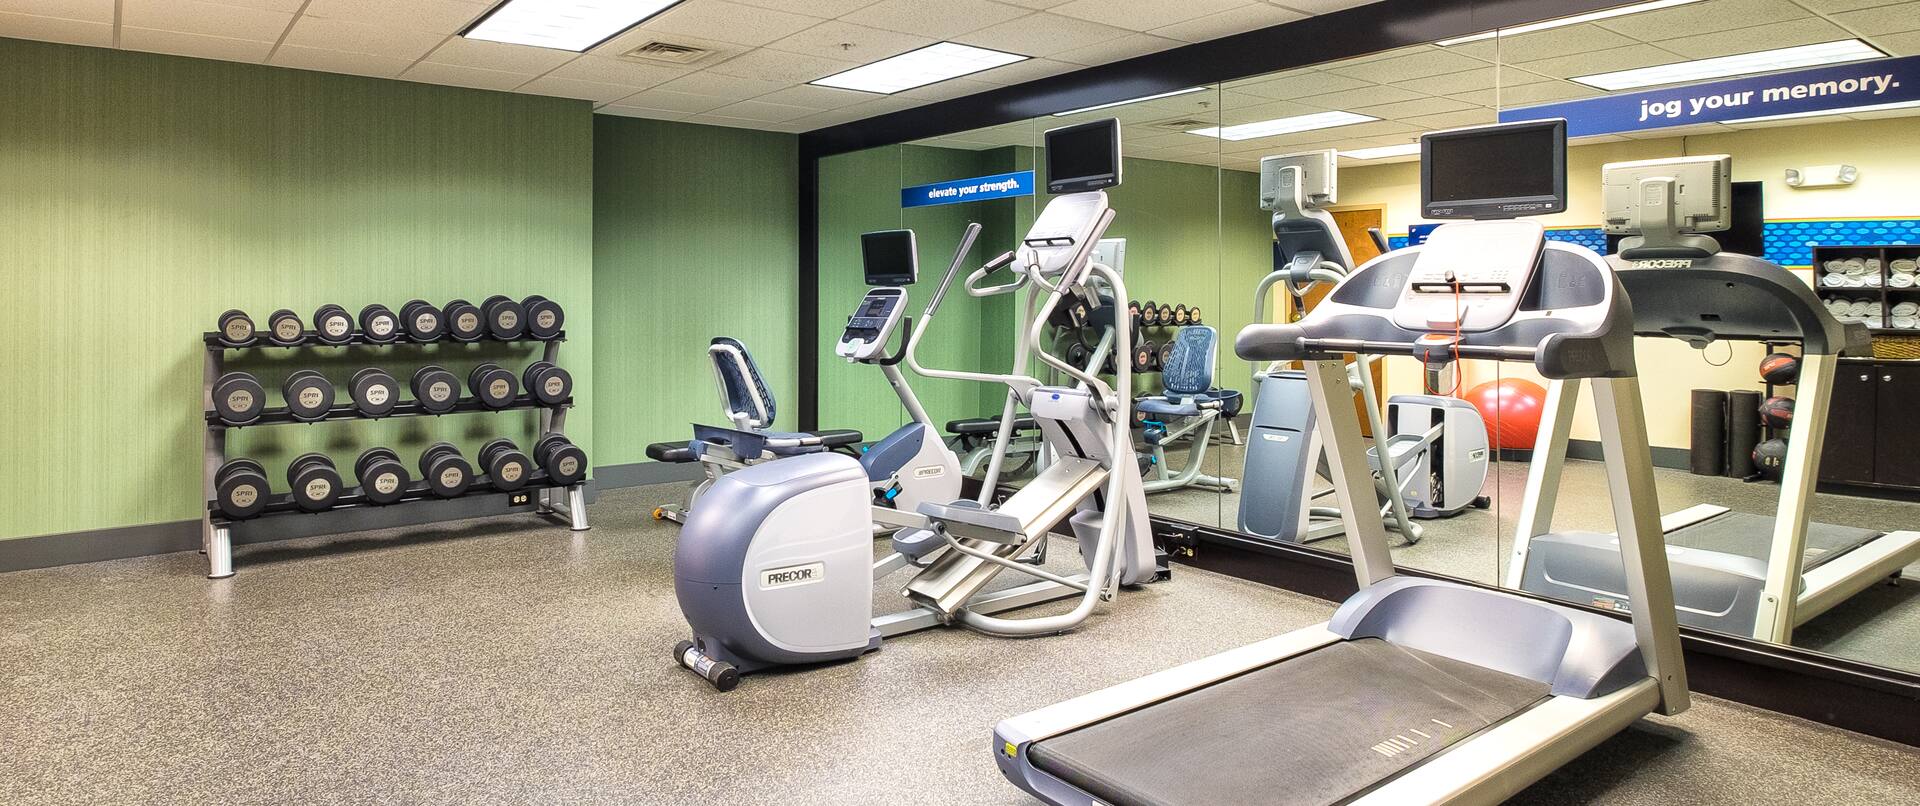 Fitness center with exercise bike, treadmill and free weights